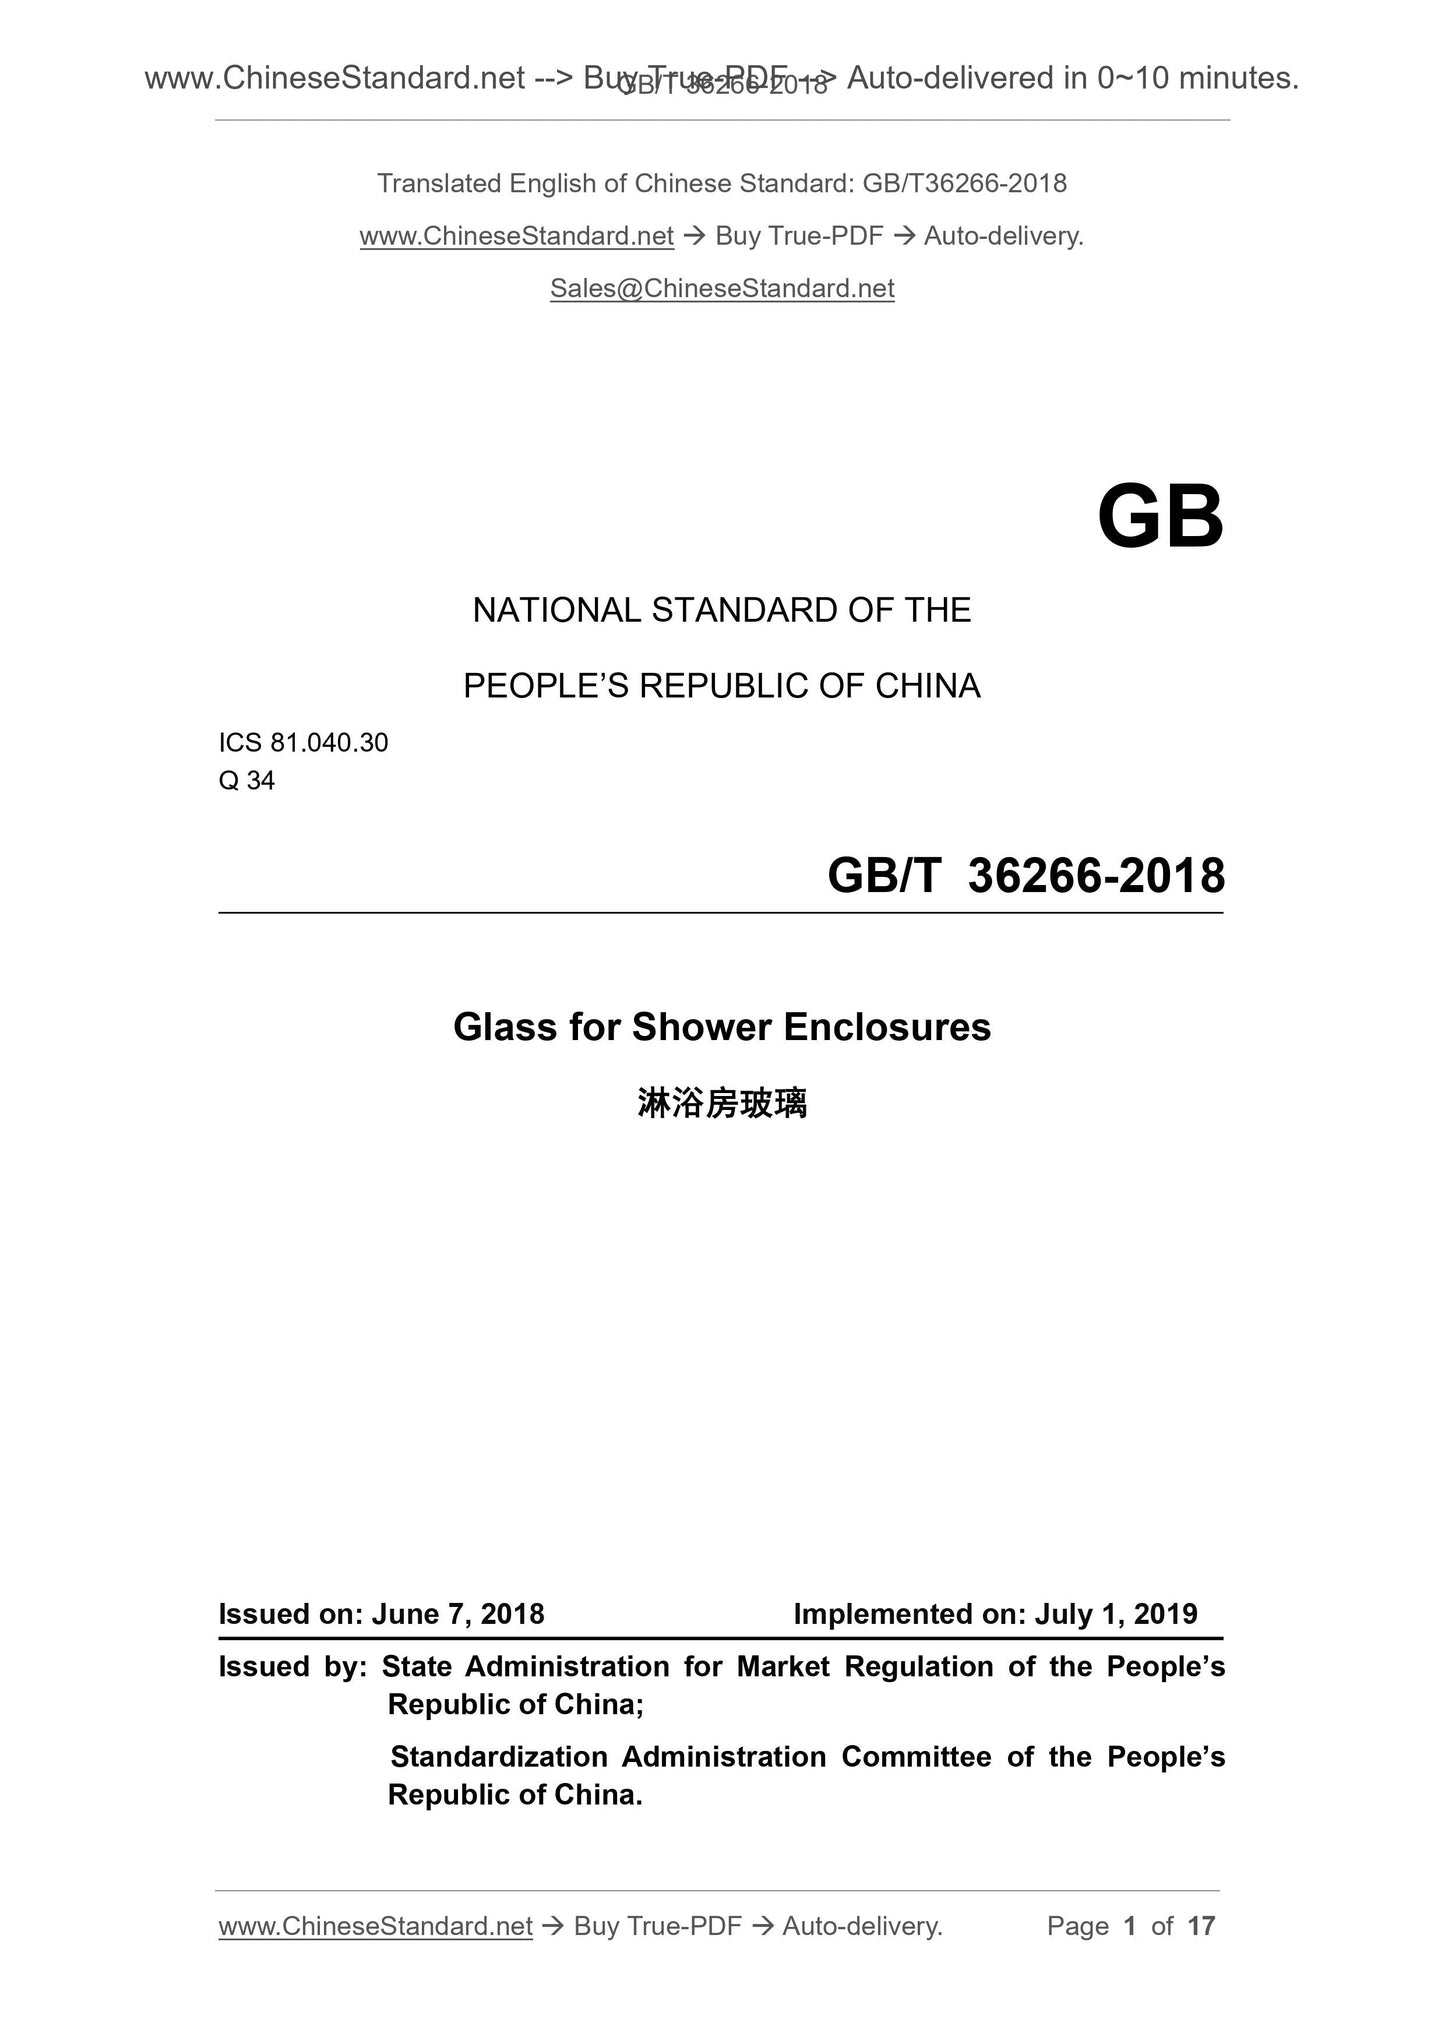 GB/T 36266-2018 Page 1